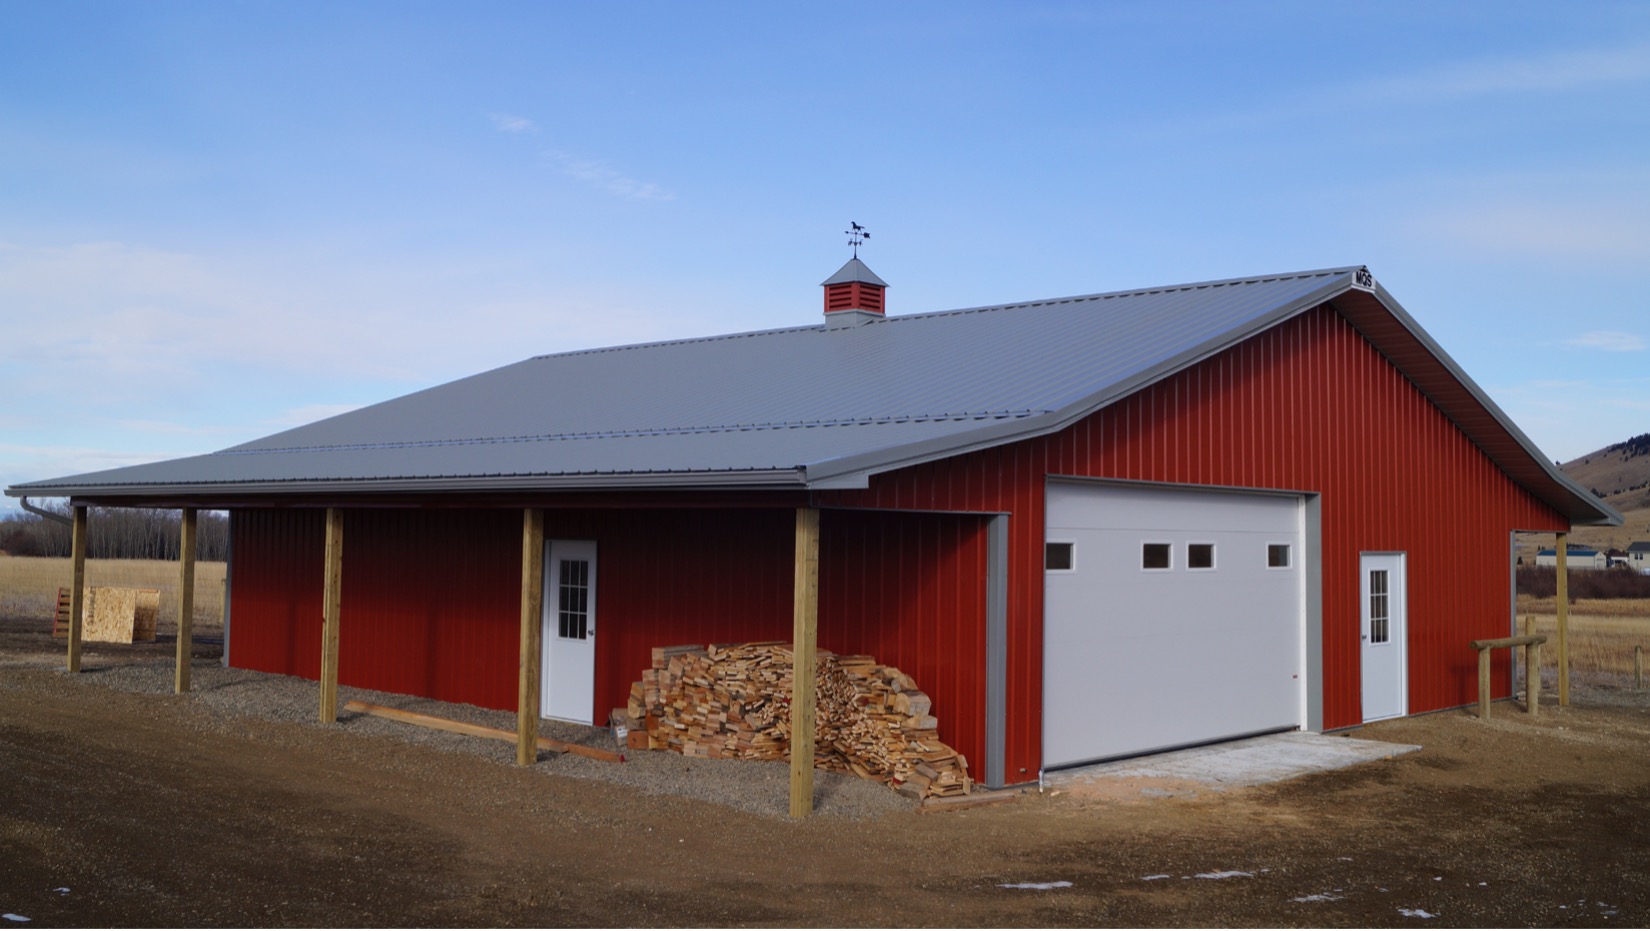 10 Incredible Reasons to Build a Post Frame Steel Building Instead of Steel Frame